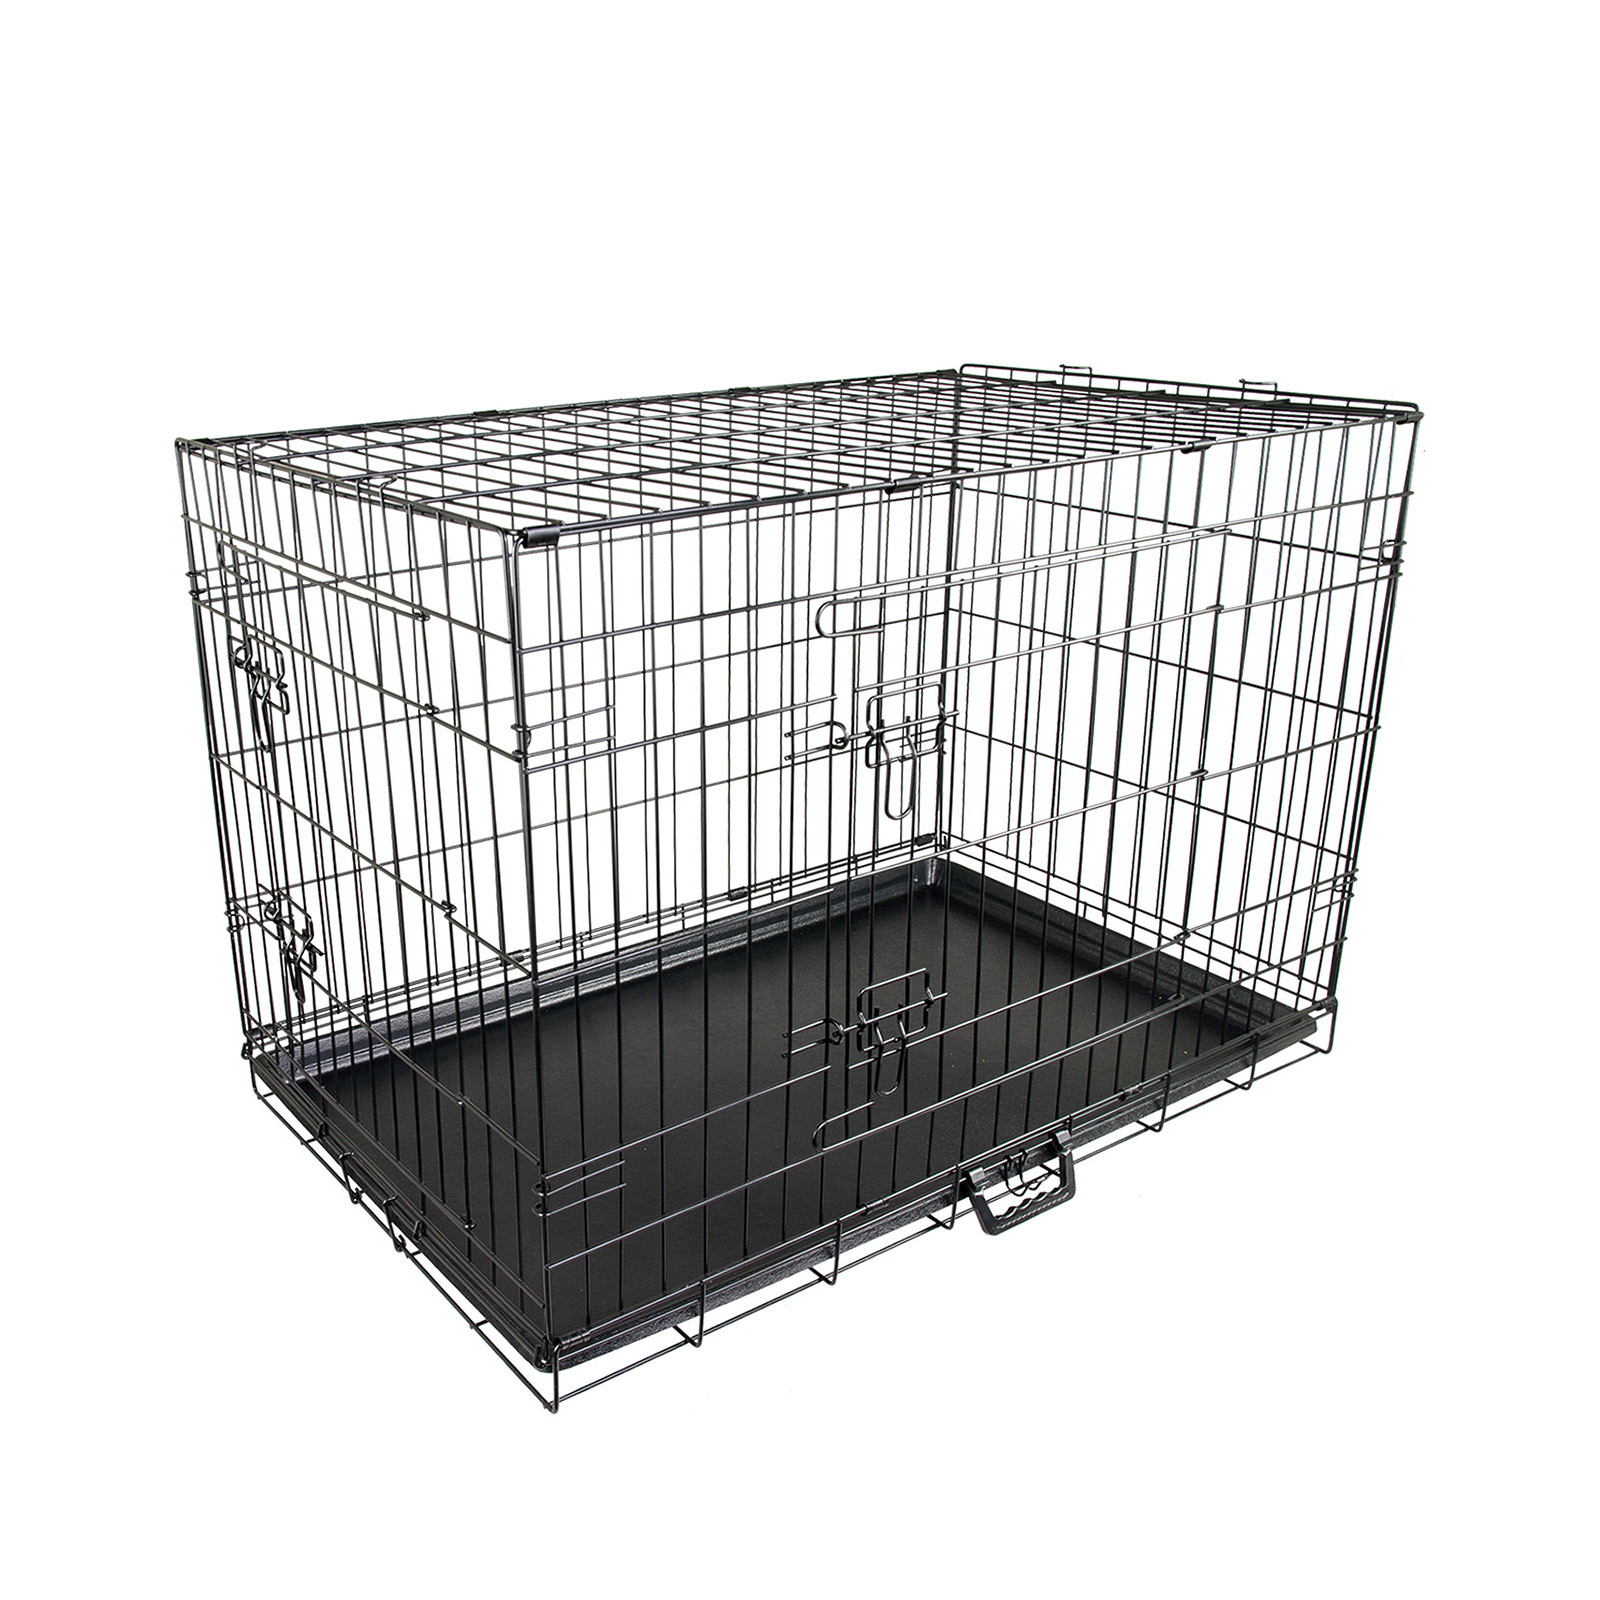 42" XLarge Collapsible 2 Door Metal Wire Dog Crate Cage With Tray Pet Puppy eBay